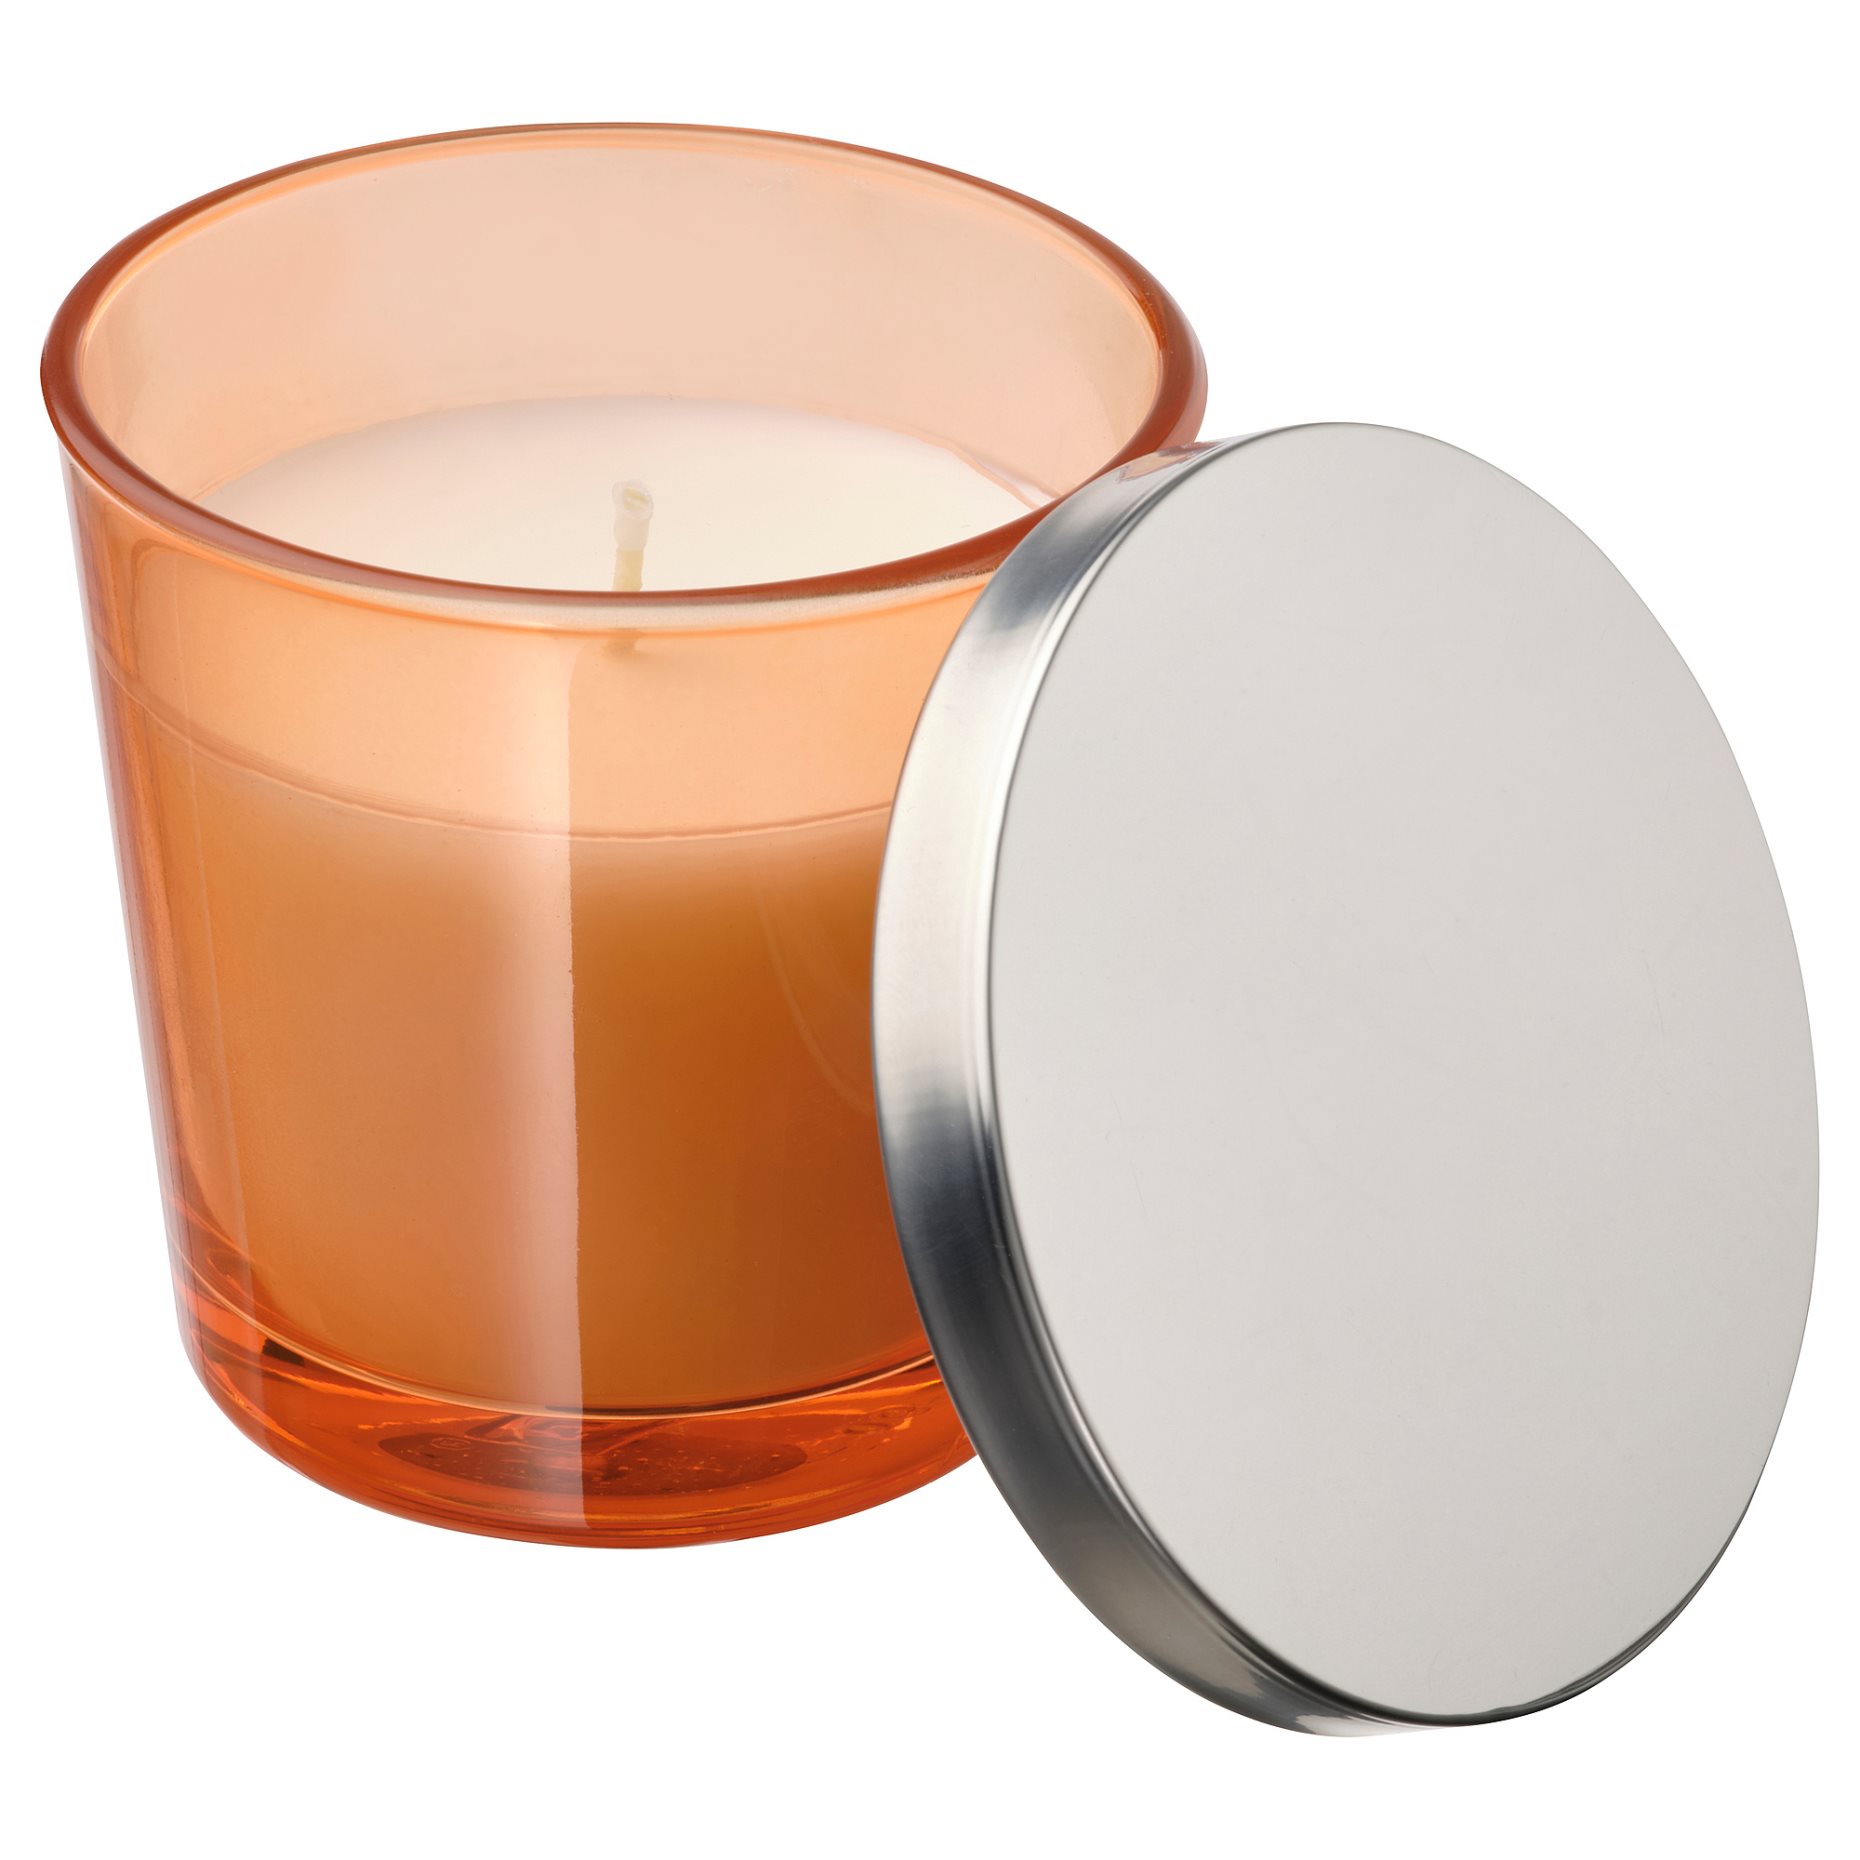 ASPSKOG, scented candle in glass with lid/Spiced pumpkin, 25 hr, 105.272.09